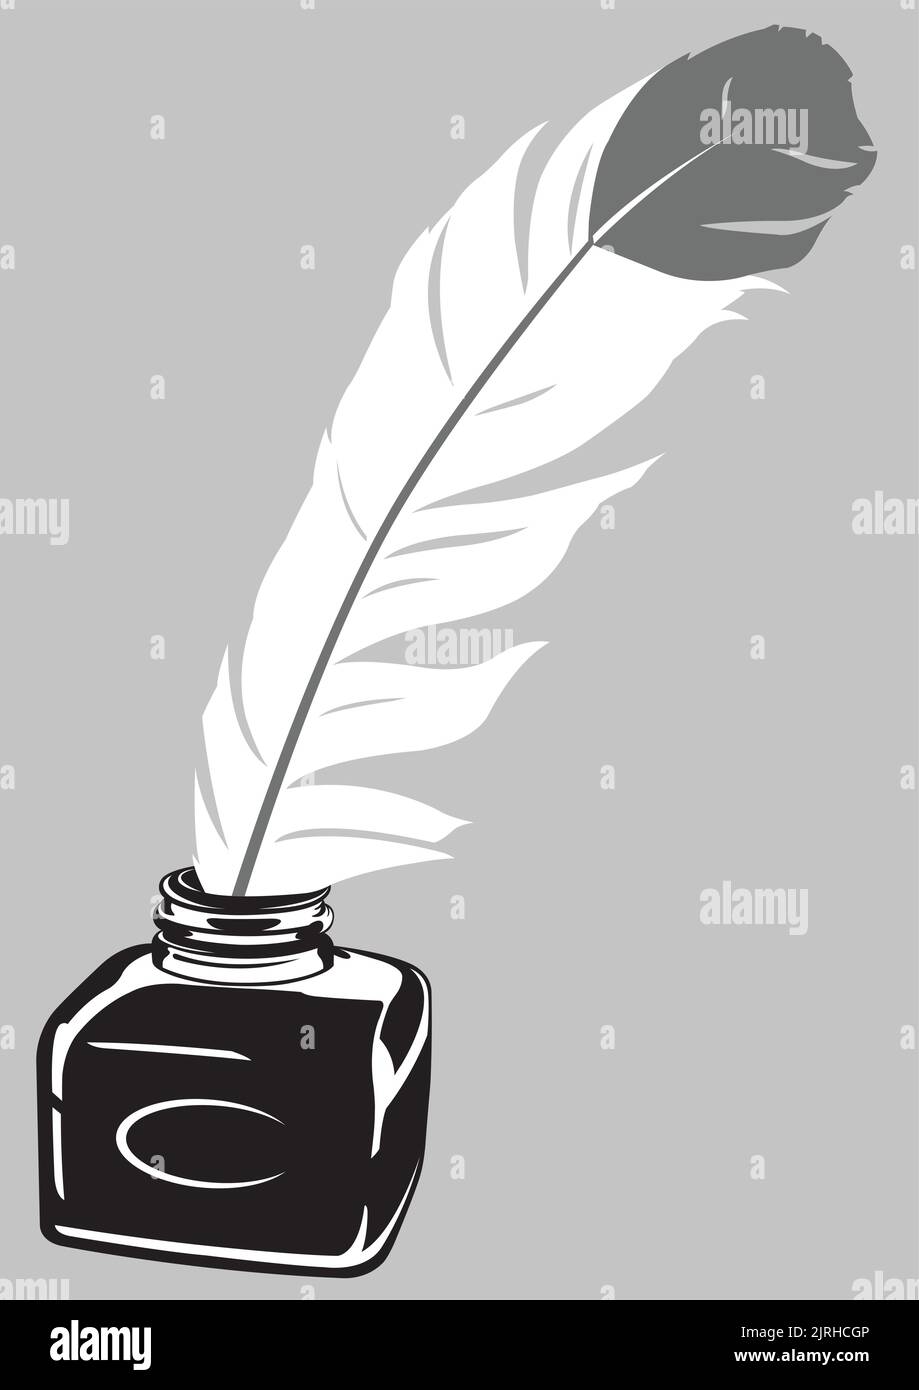 A graphic vector illustration of an ink quill pen and inkwell. Stock Vector